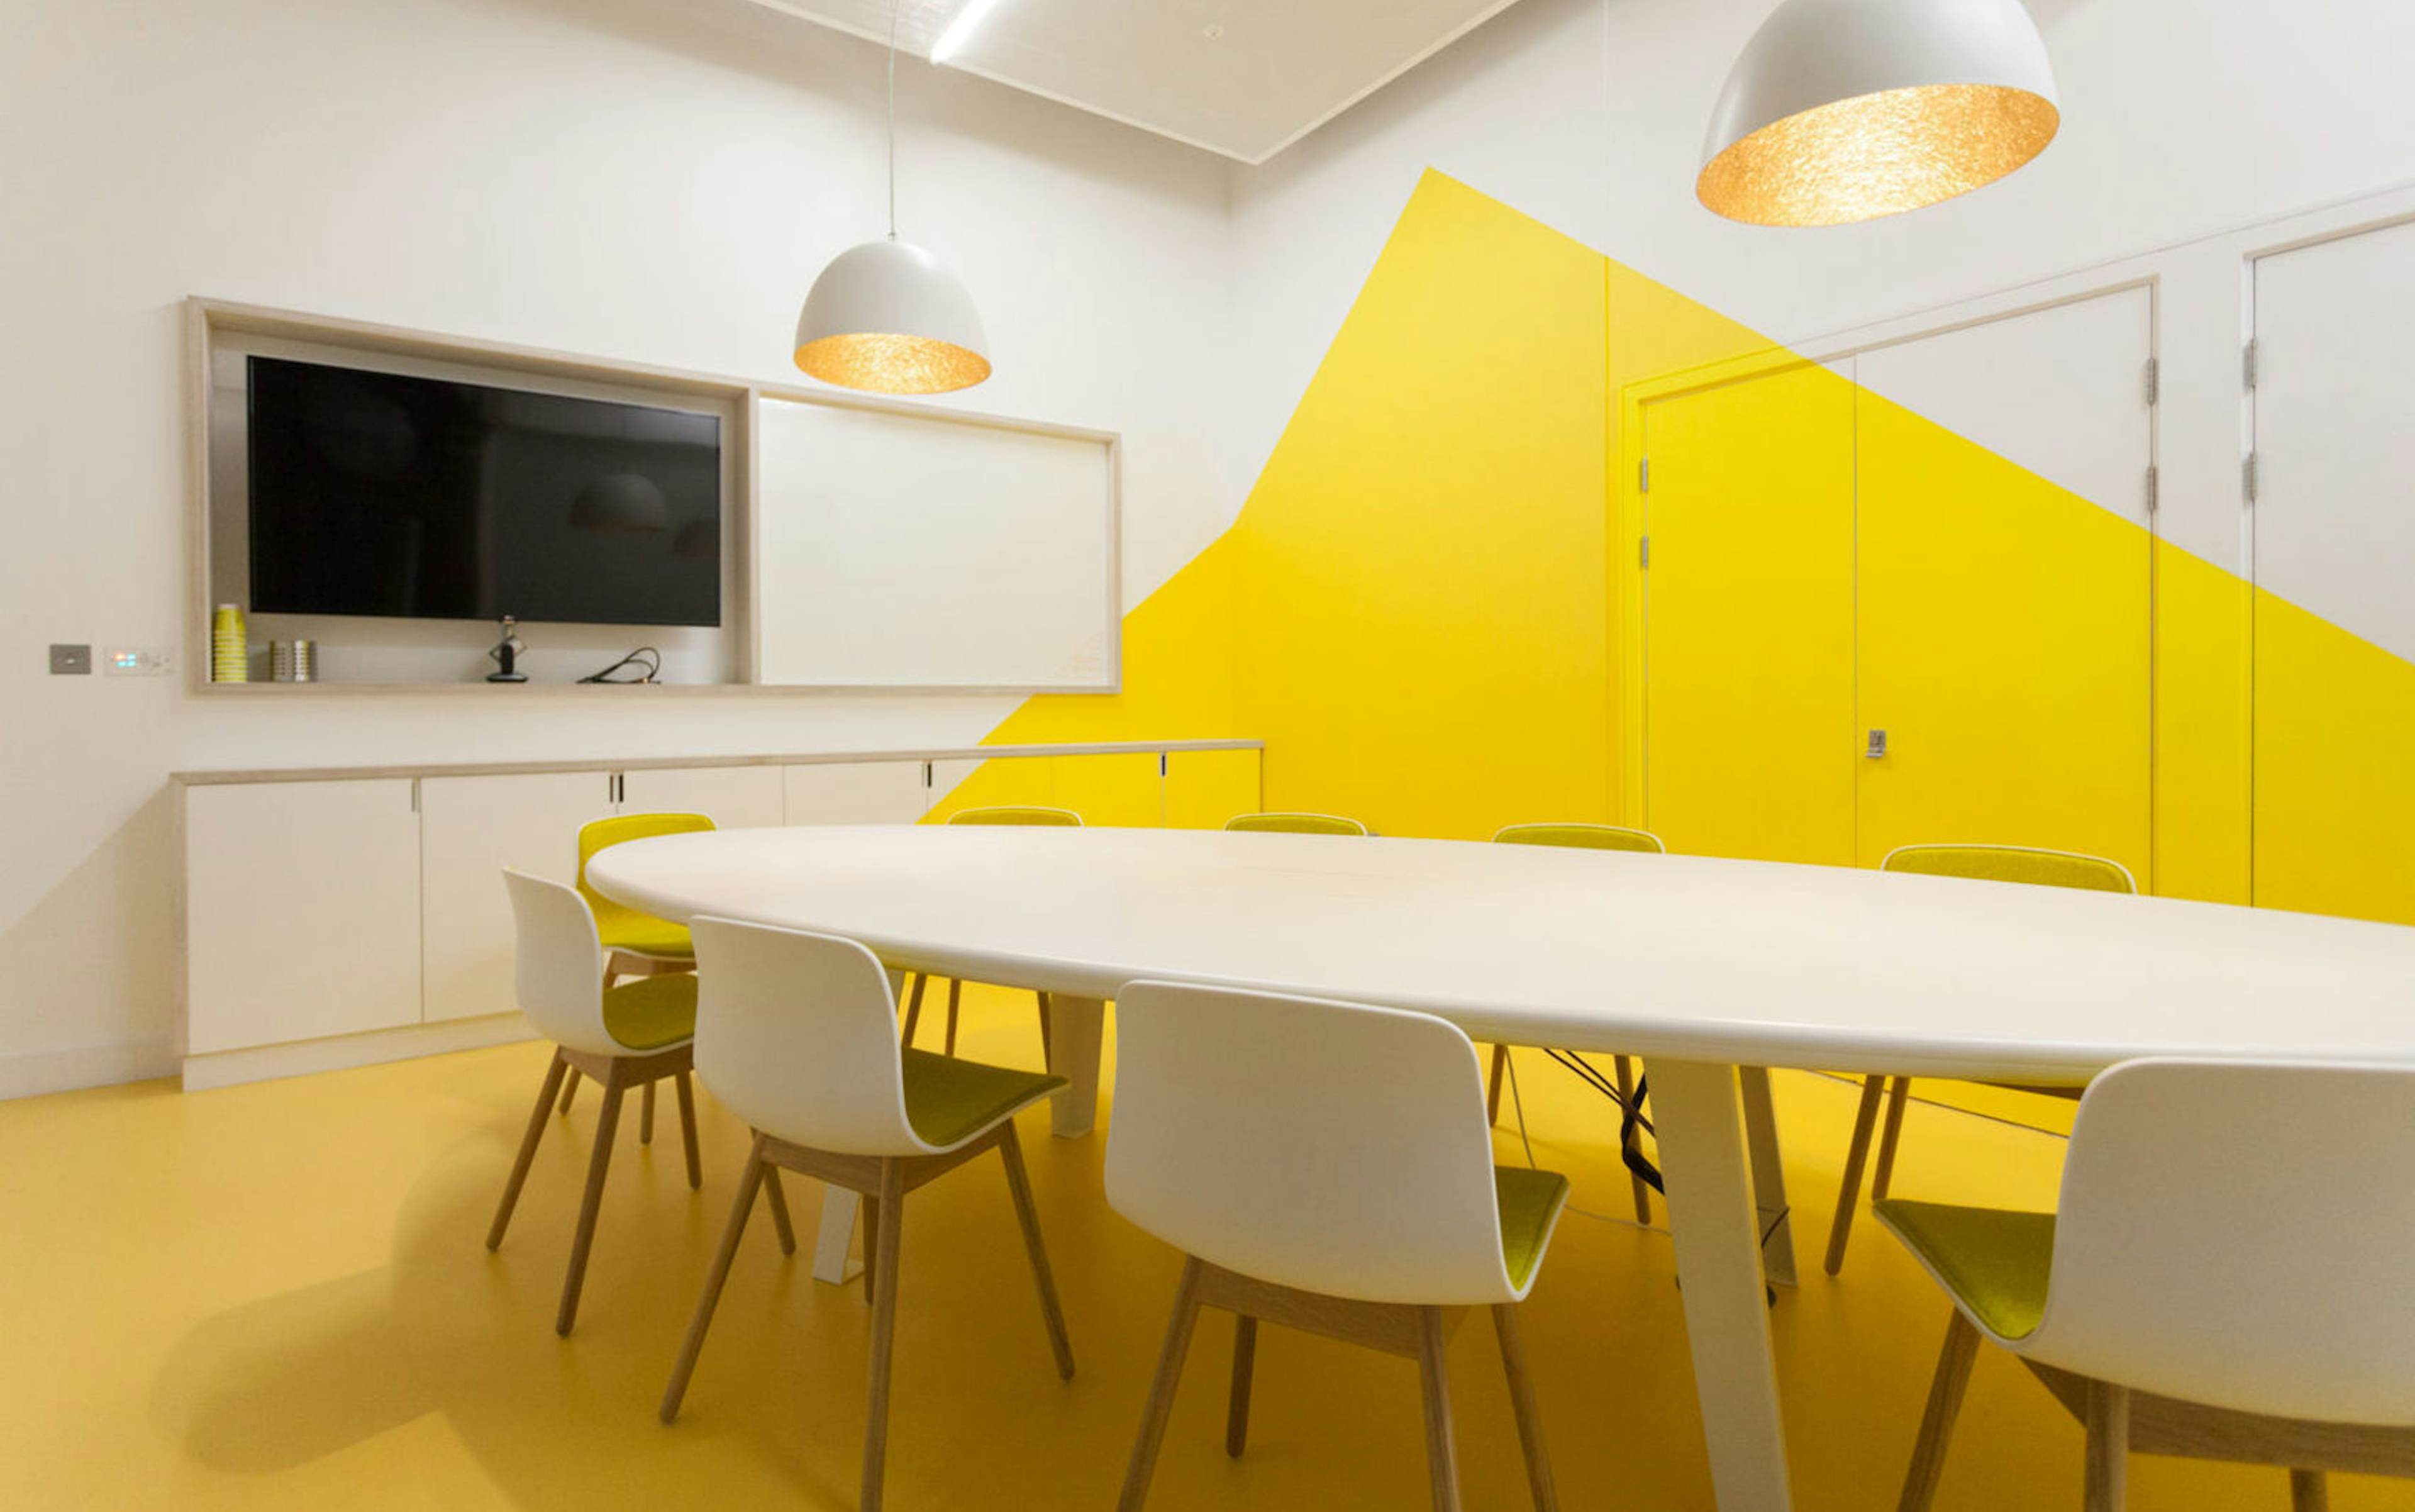 Huckletree Shoreditch - Sunnyvale Meeting Room image 1